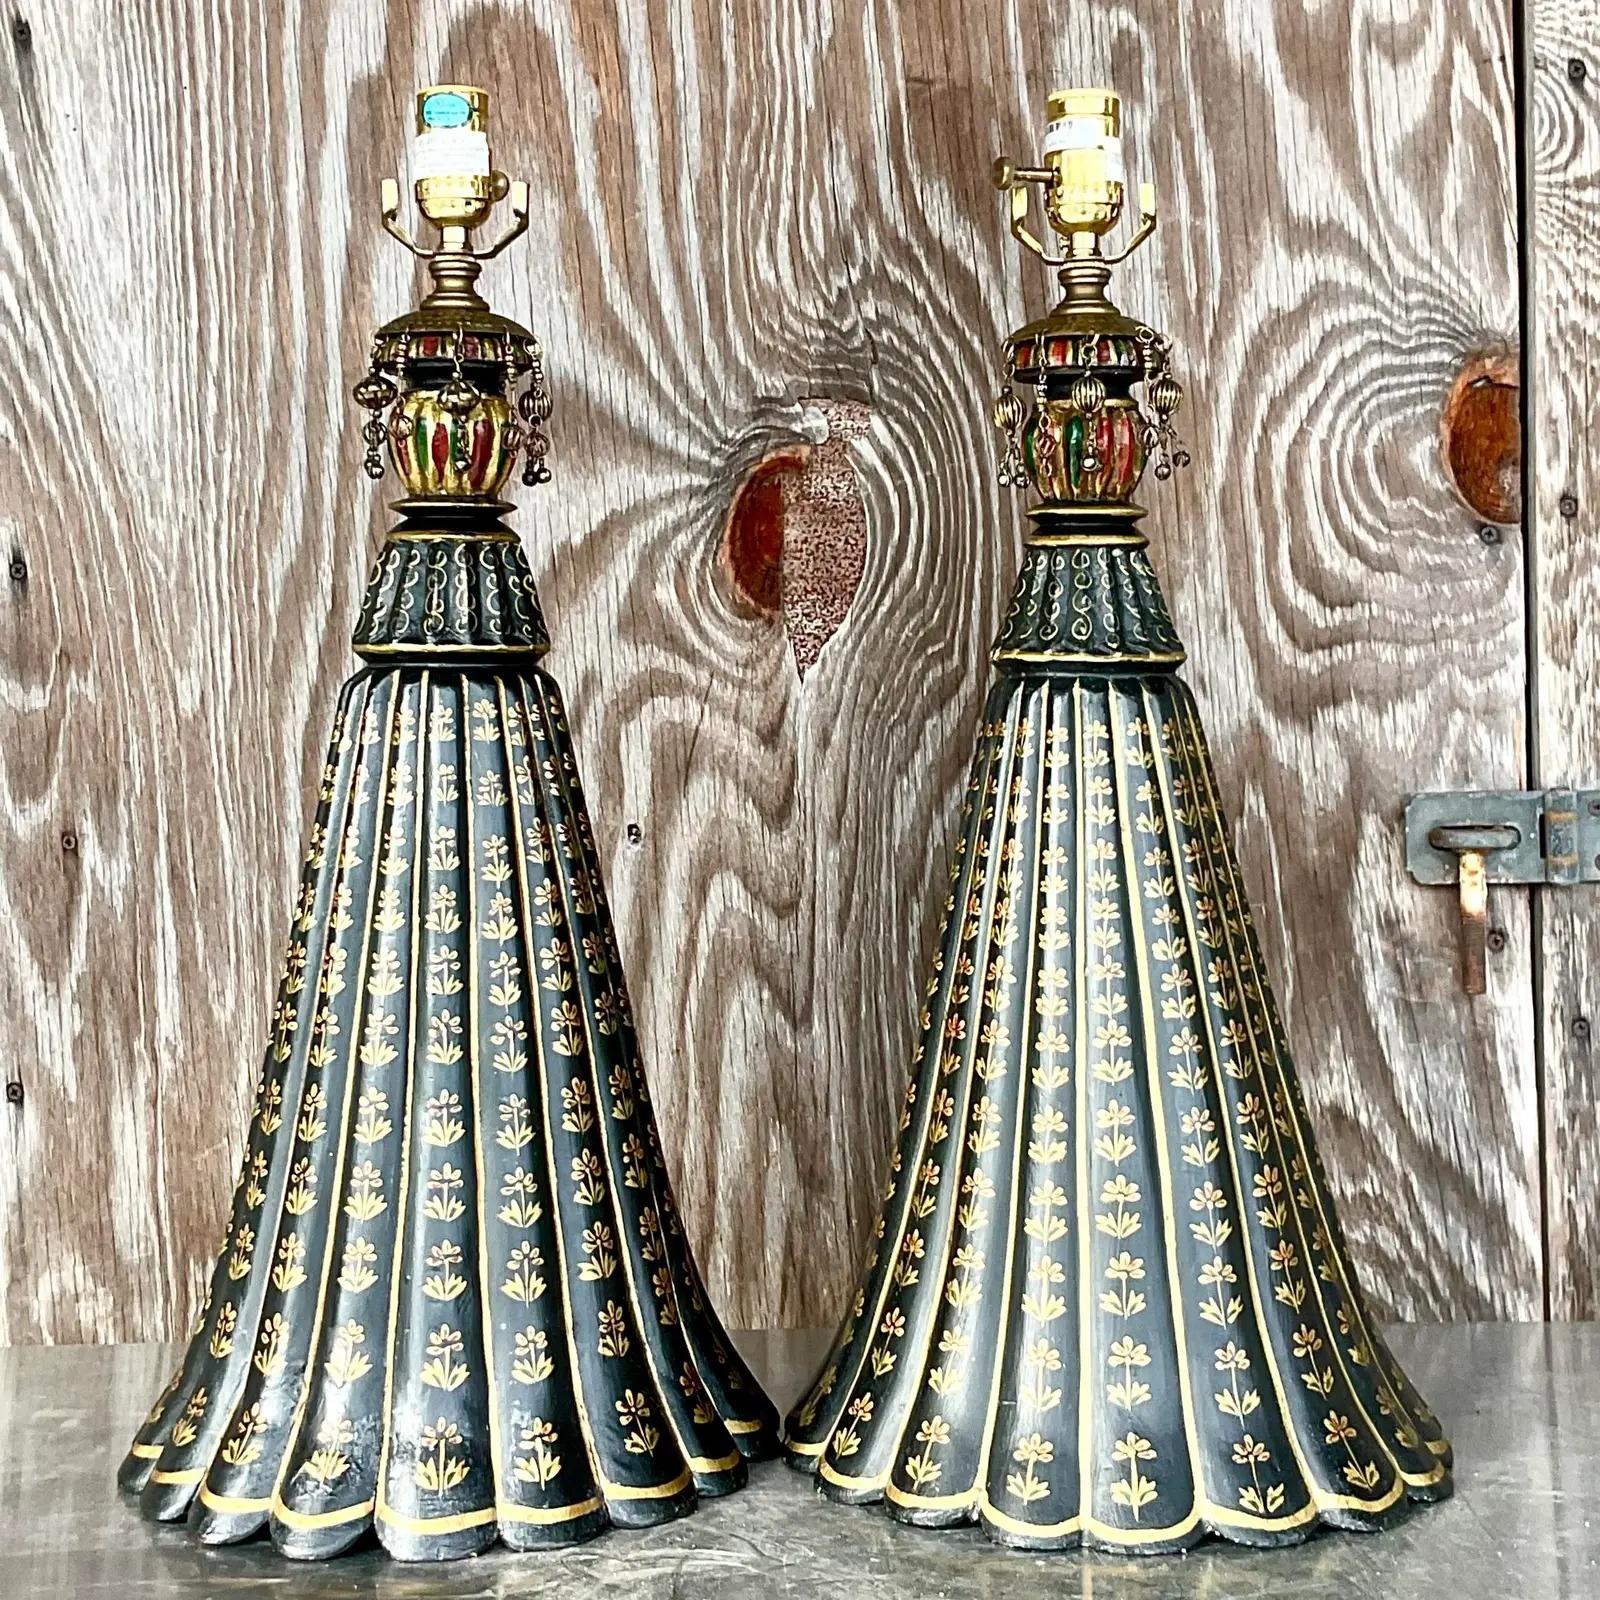 A gorgeous pair of vintage Regency hand painted lamps. A beautiful trumpet shape in black with gorgeous gilt fleur de lys. Dangling charms for extra glamour. Acquired from a Palm Beach estate.

The lamps are in great vintage condition. Minor